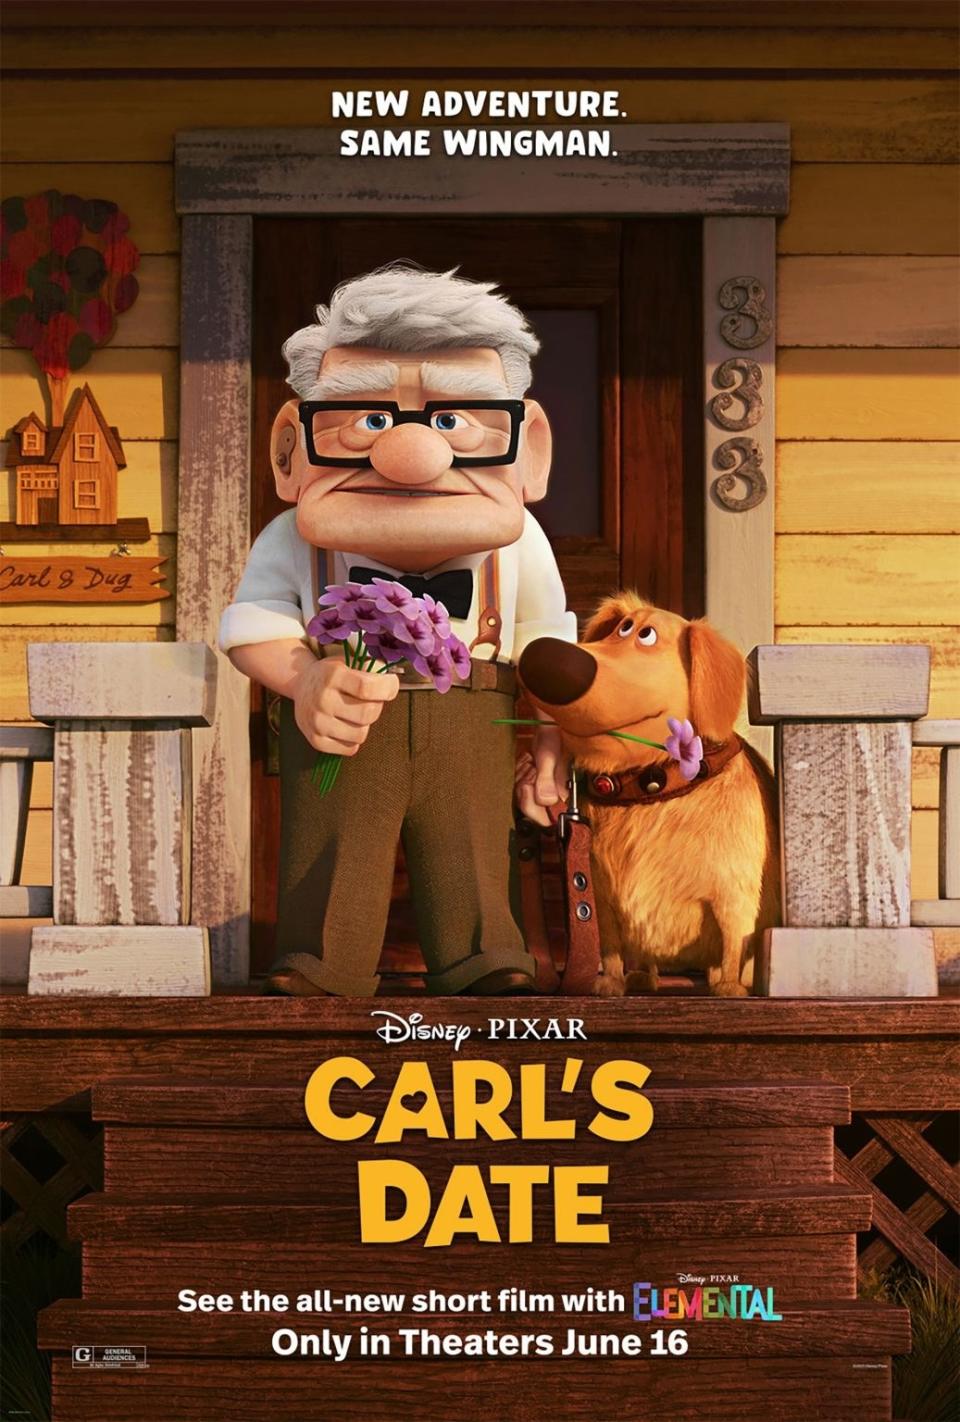 Poster for "Carl's Date," featuring Carl and the dog Dug, in theaters June 16: "New adventure, same wingman"